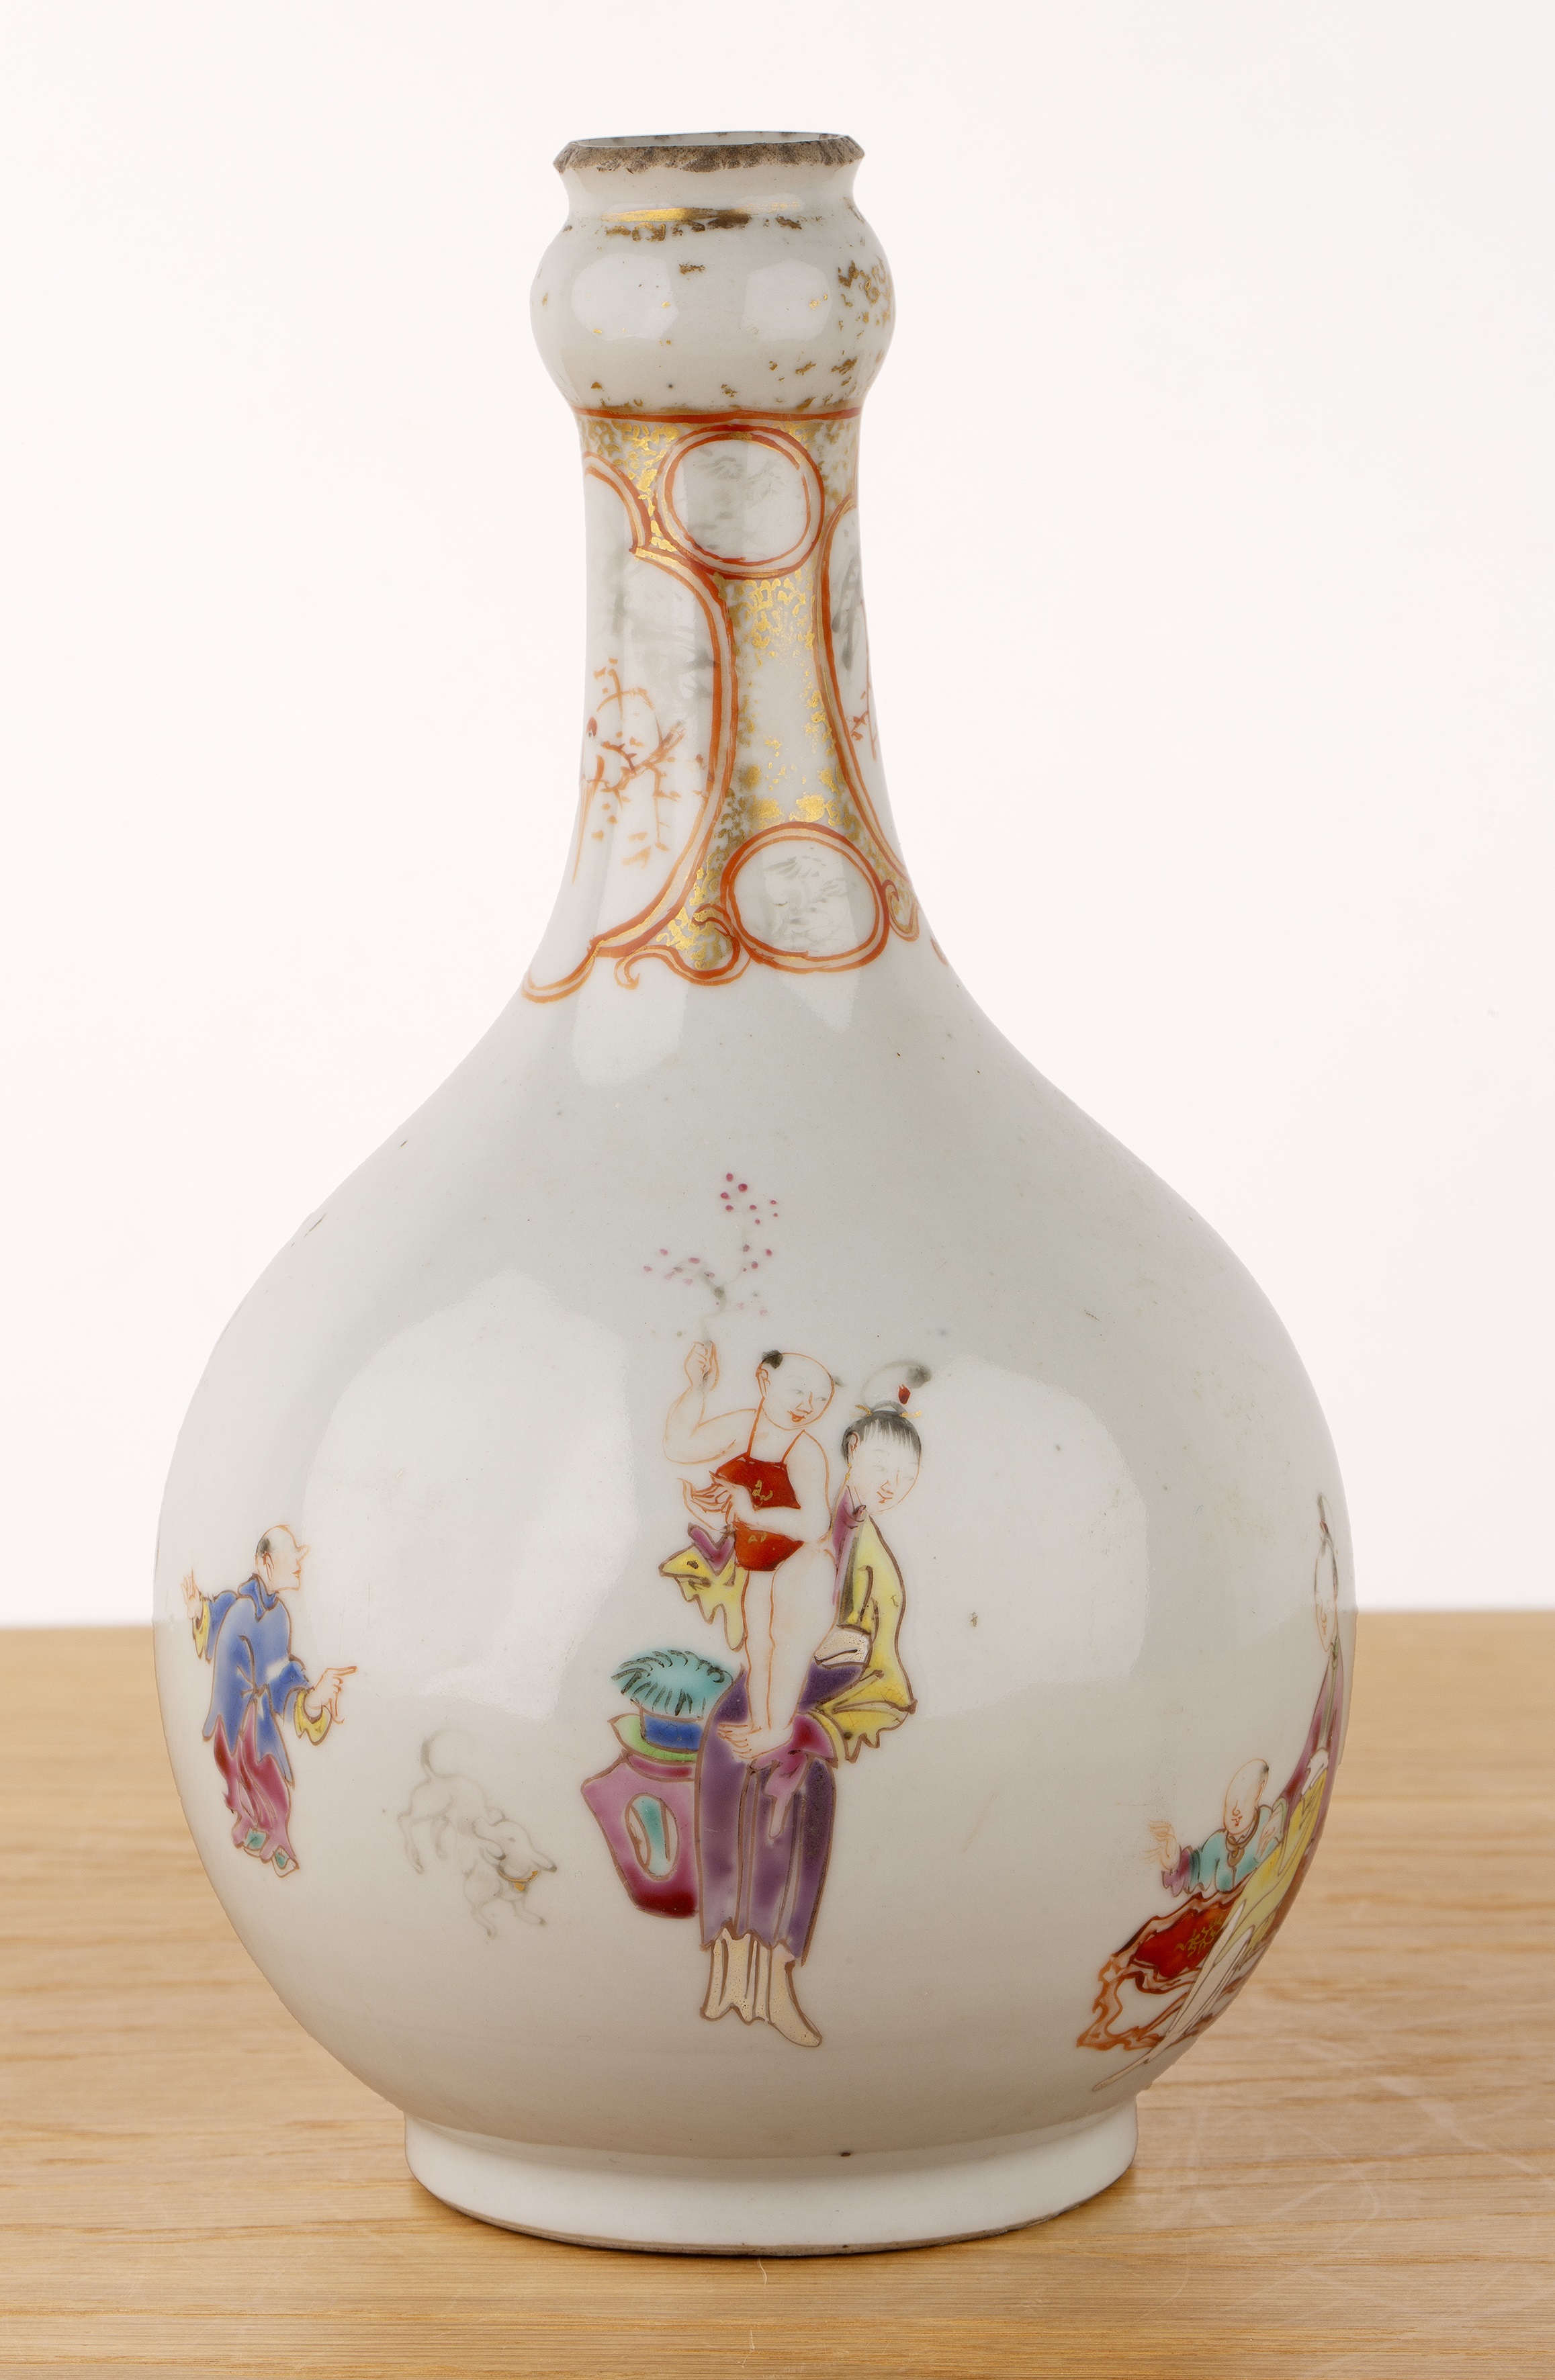 Famille rose porcelain guglet vase Chinese, late 18th Century painted with figures and a dog in an - Image 3 of 5